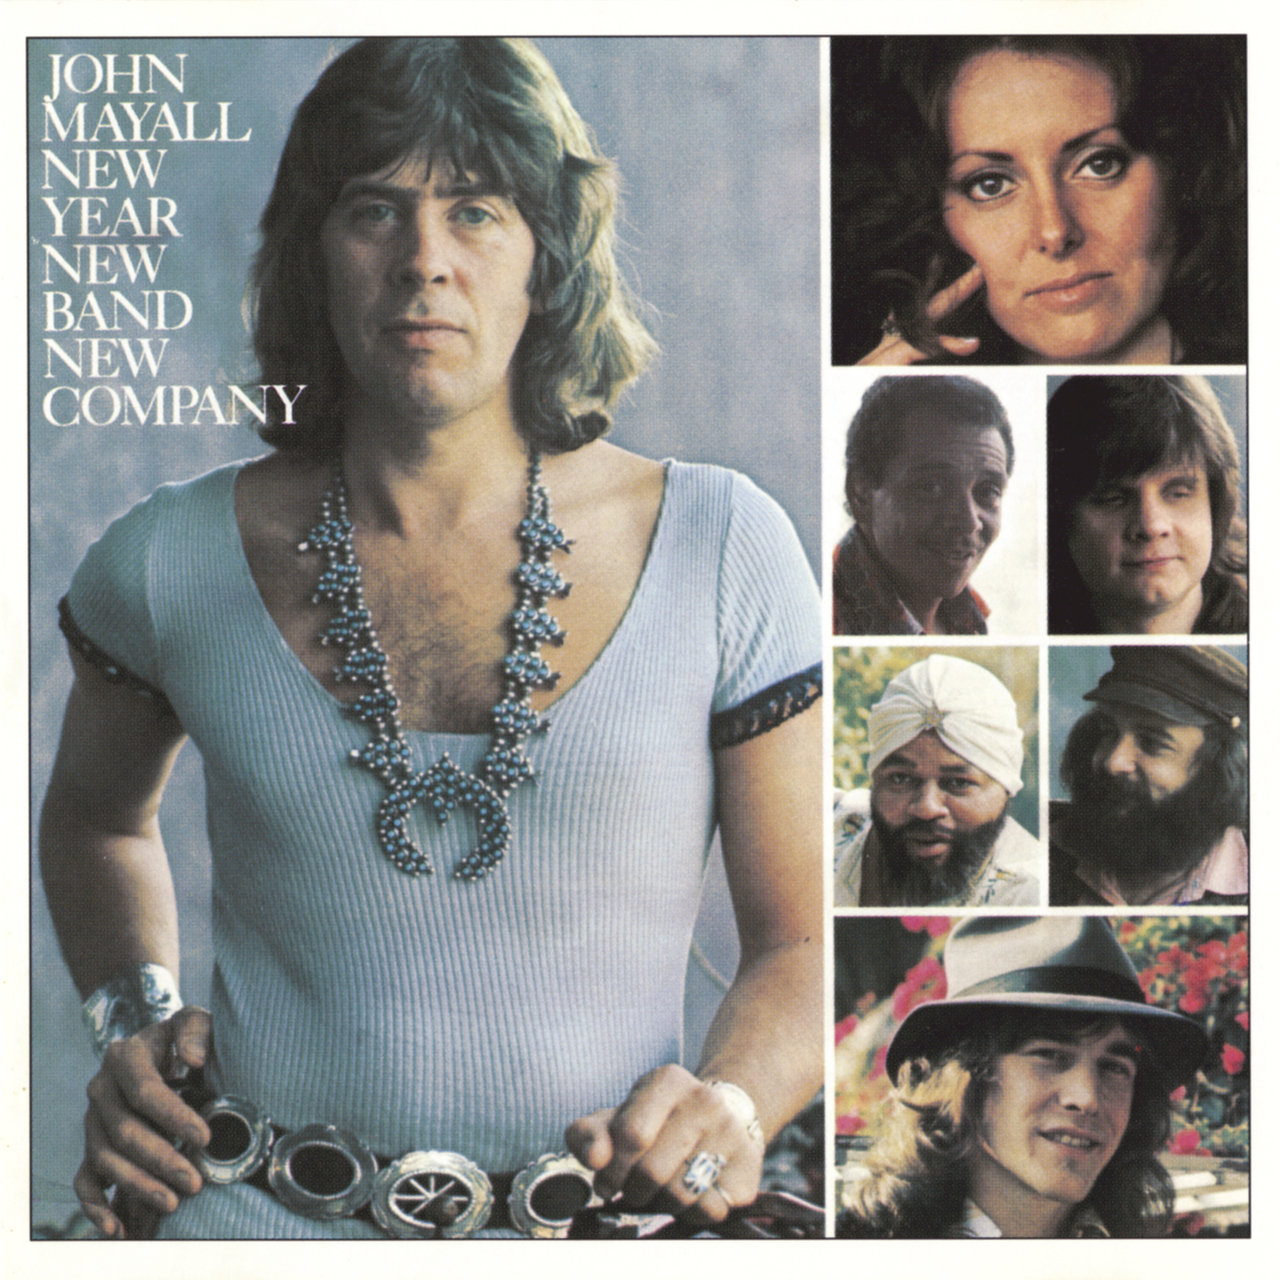 New Year New Band New Company [1975]